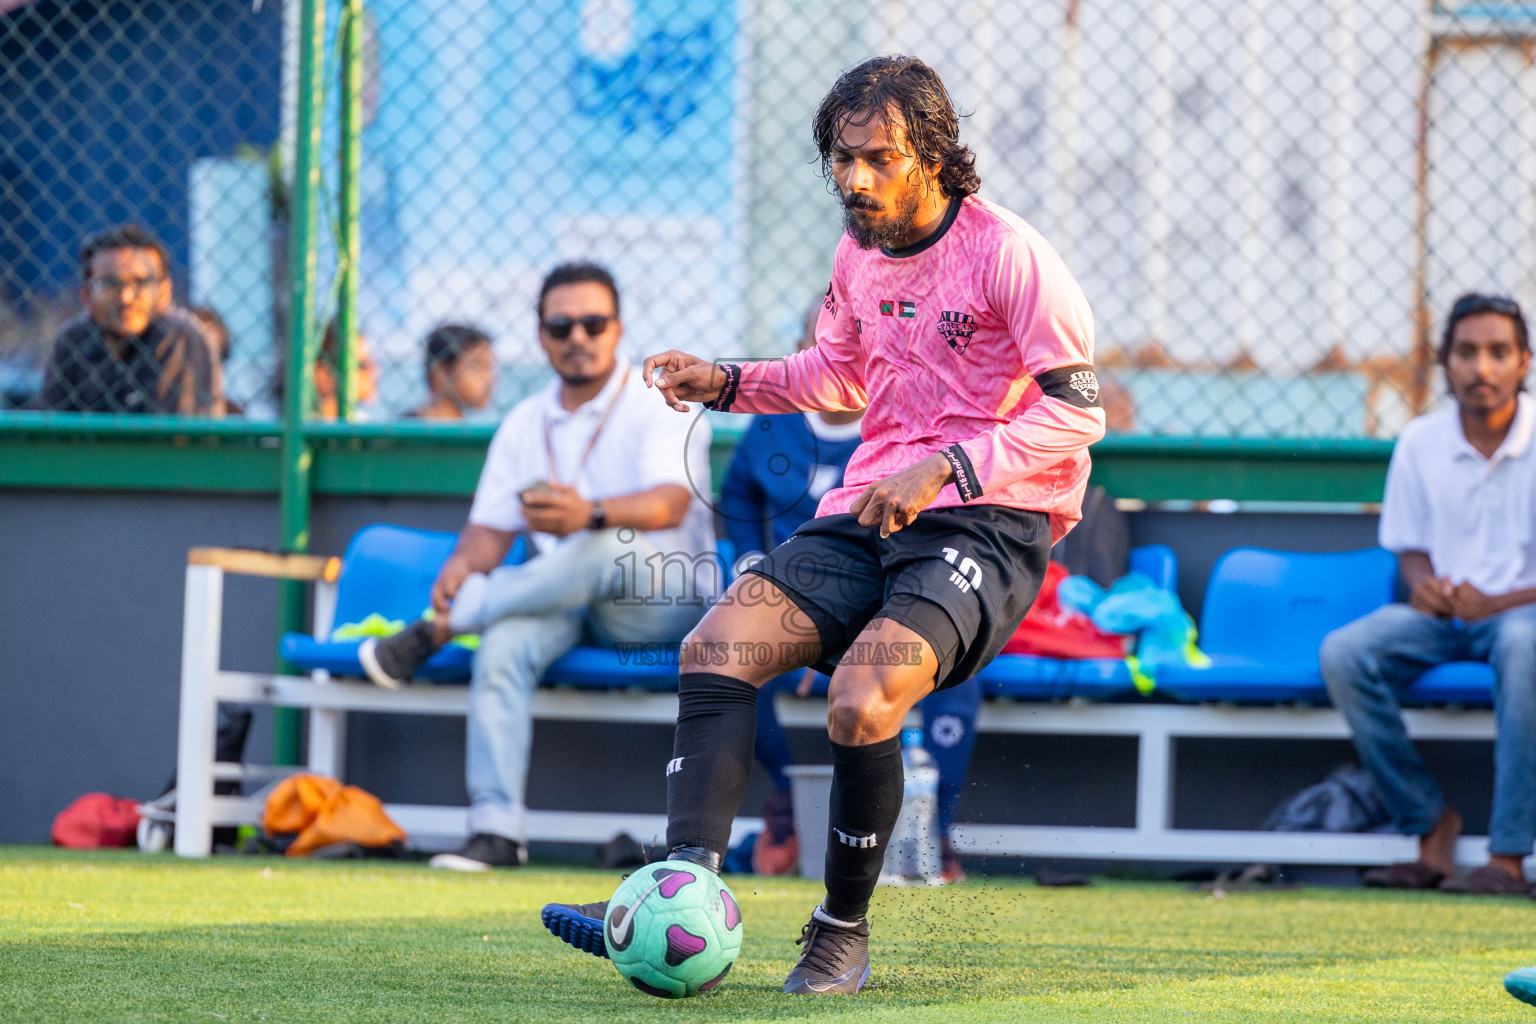 Spartans vs Escolar FC in Day 9 of BG Futsal Challenge 2024 was held on Wednesday, 20th March 2024, in Male', Maldives
Photos: Ismail Thoriq / images.mv